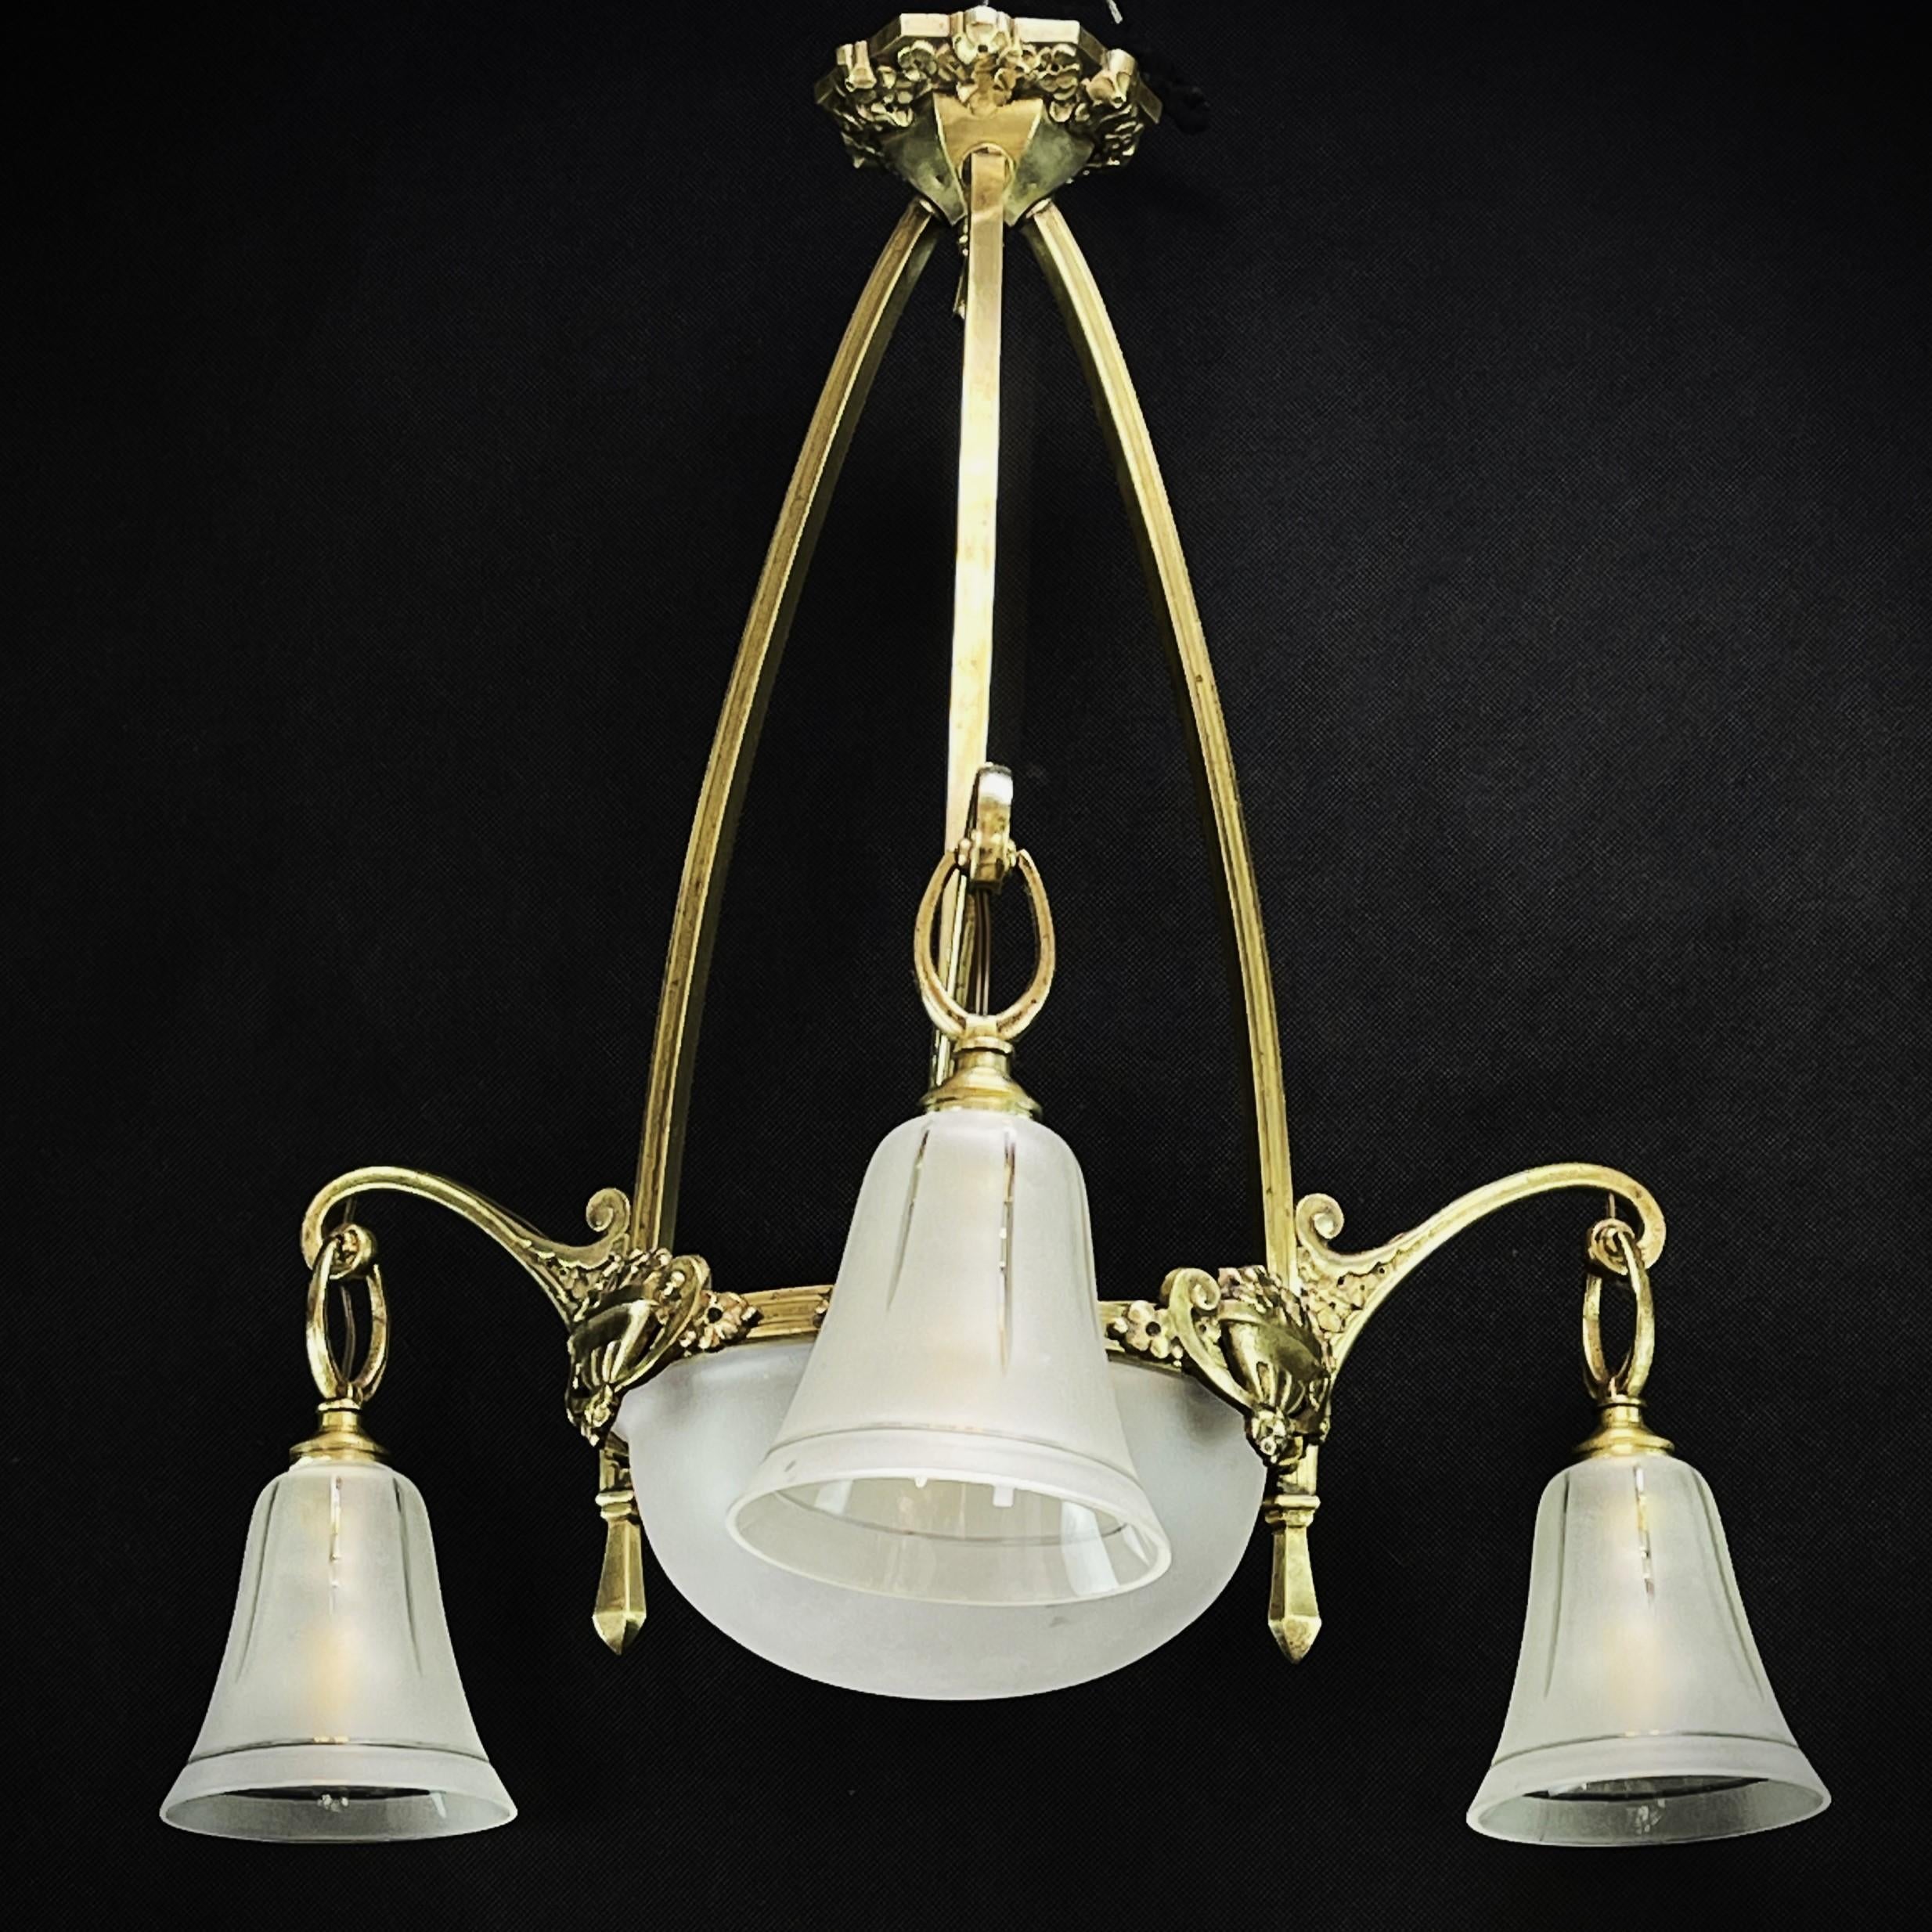 This stunning 1930s Art Deco chandelier is an outstanding example of the elegance and sophistication of the Art Deco style.

This Art Deco chandelier is not only an impressive piece of design history, but also a true eye-catcher in any